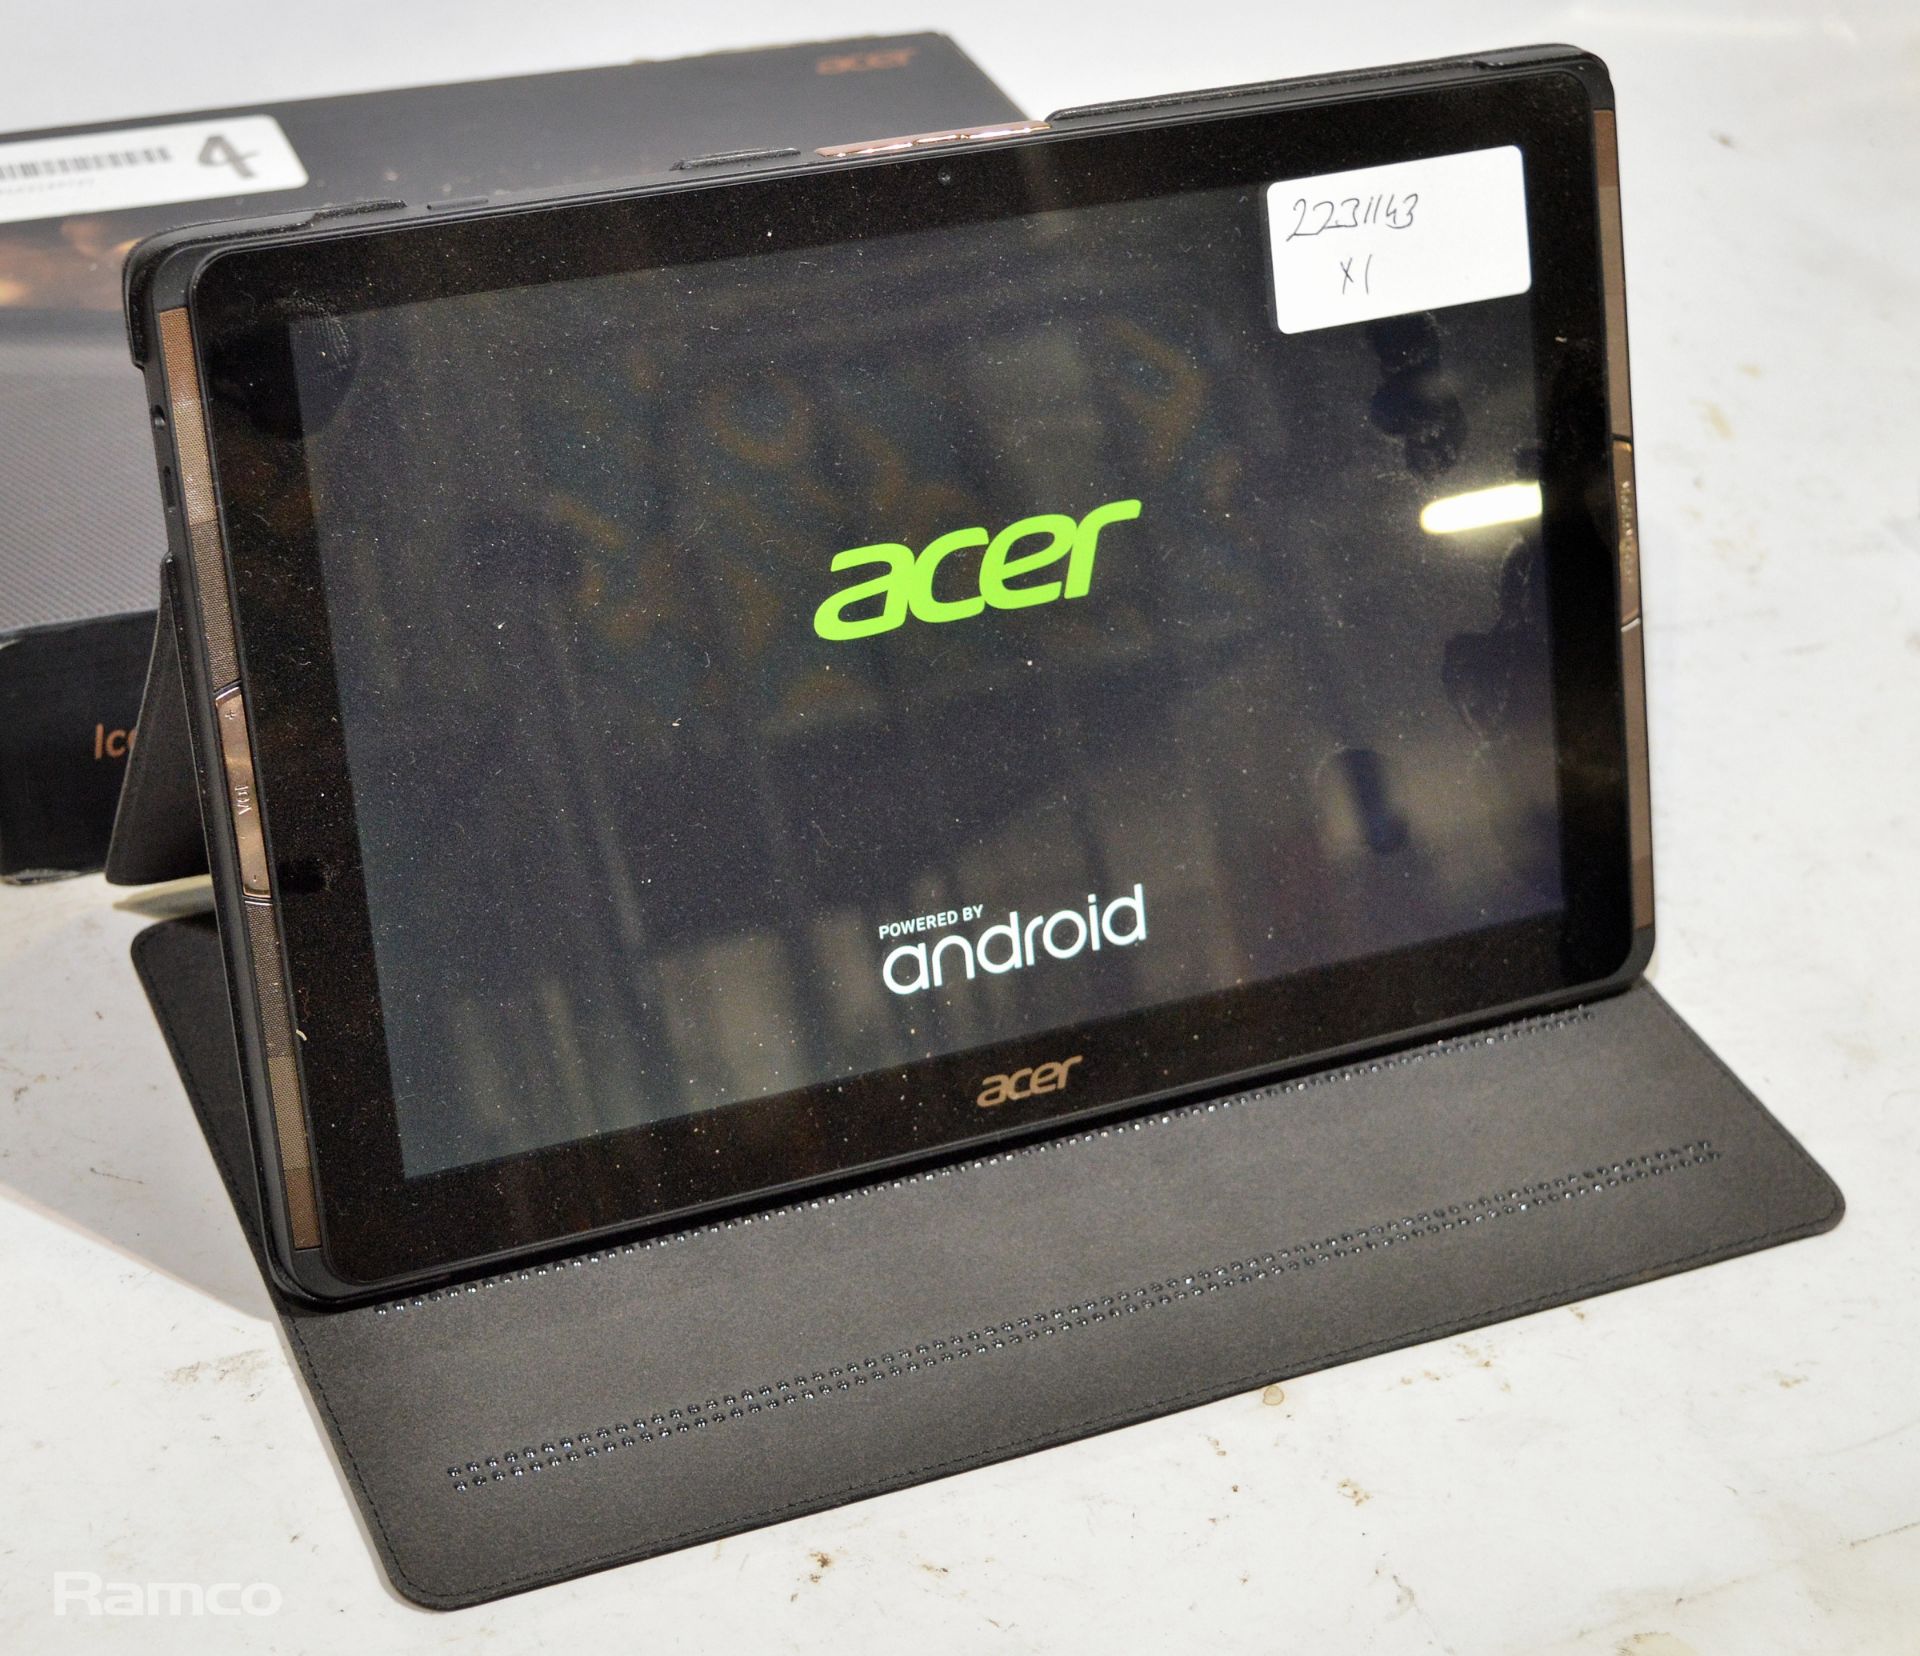 2x Acer A6002 Iconia Tab 10 tablets - Image 3 of 4